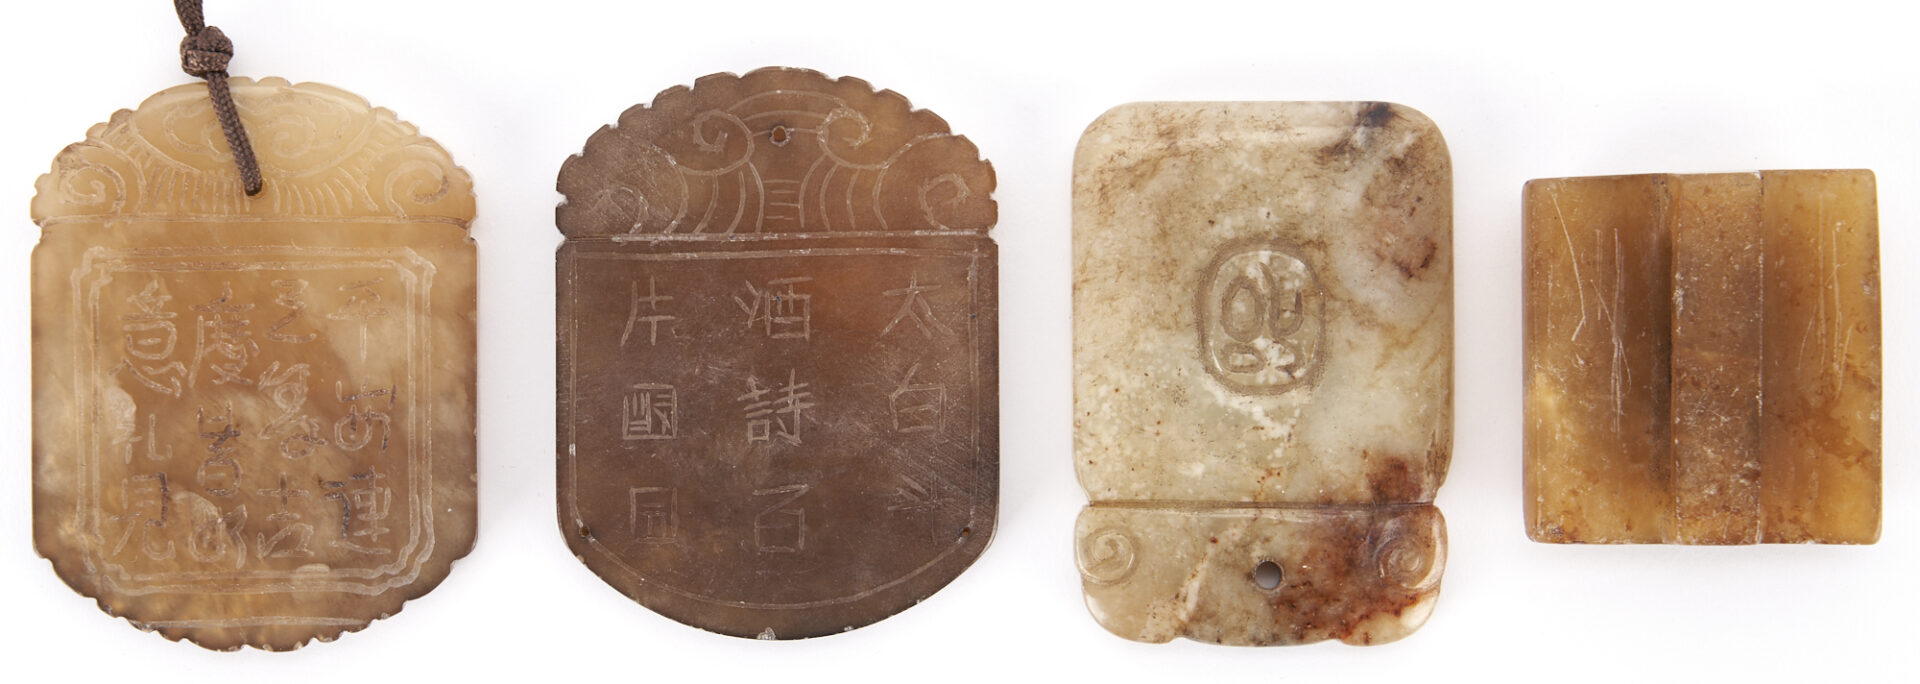 Lot 246: 11 Chinese Carved Agate Items